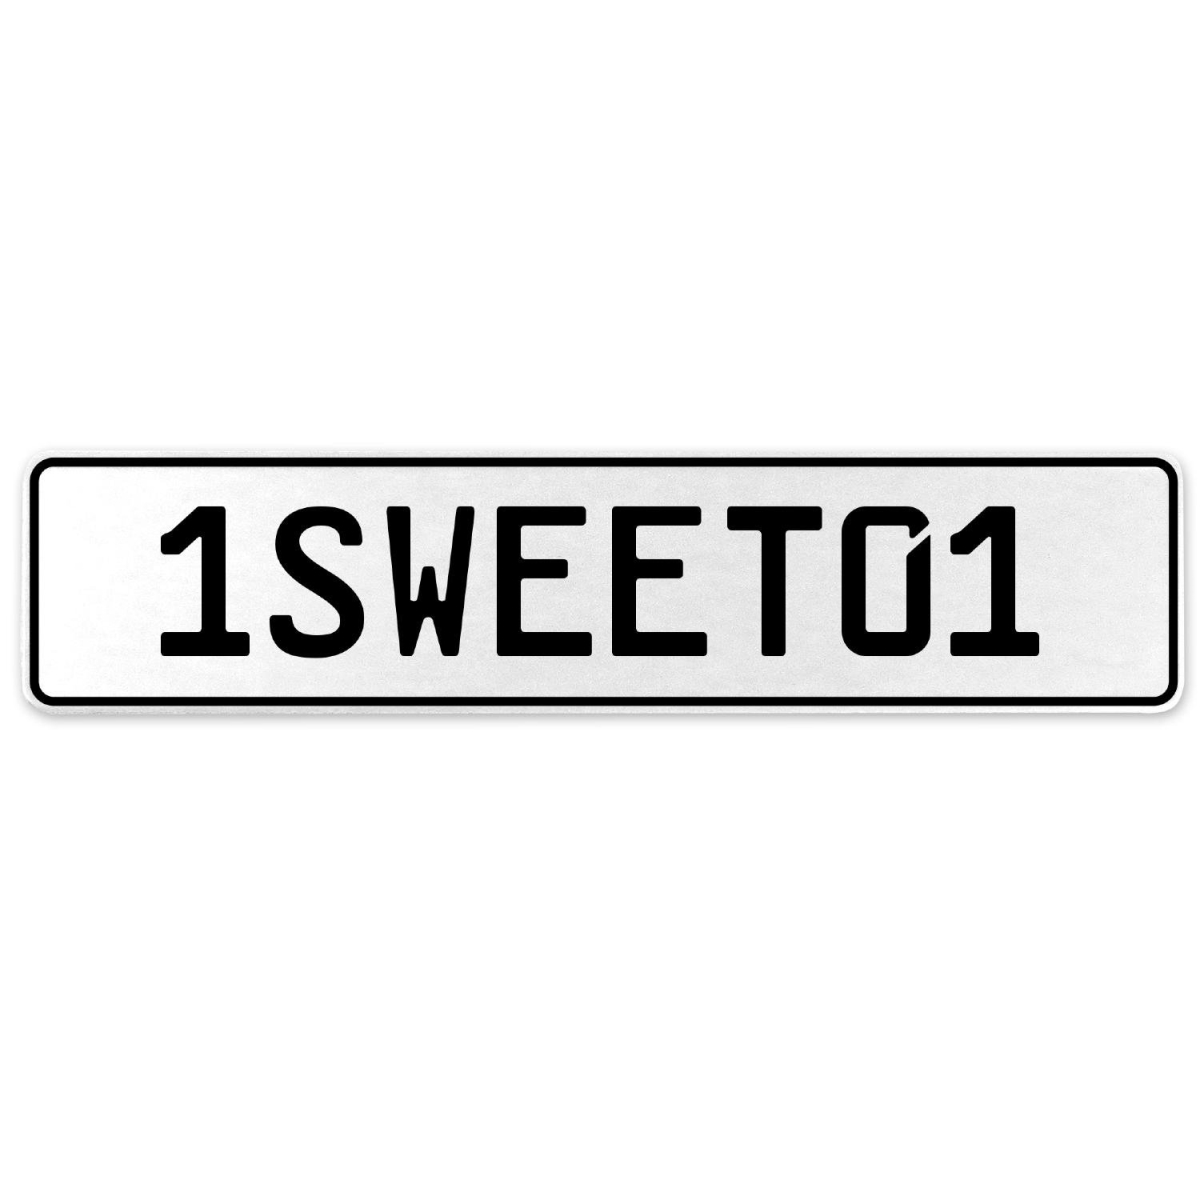 554202 1sweet01 - White Aluminum Street Sign Mancave Euro Plate Name Door Sign Wall